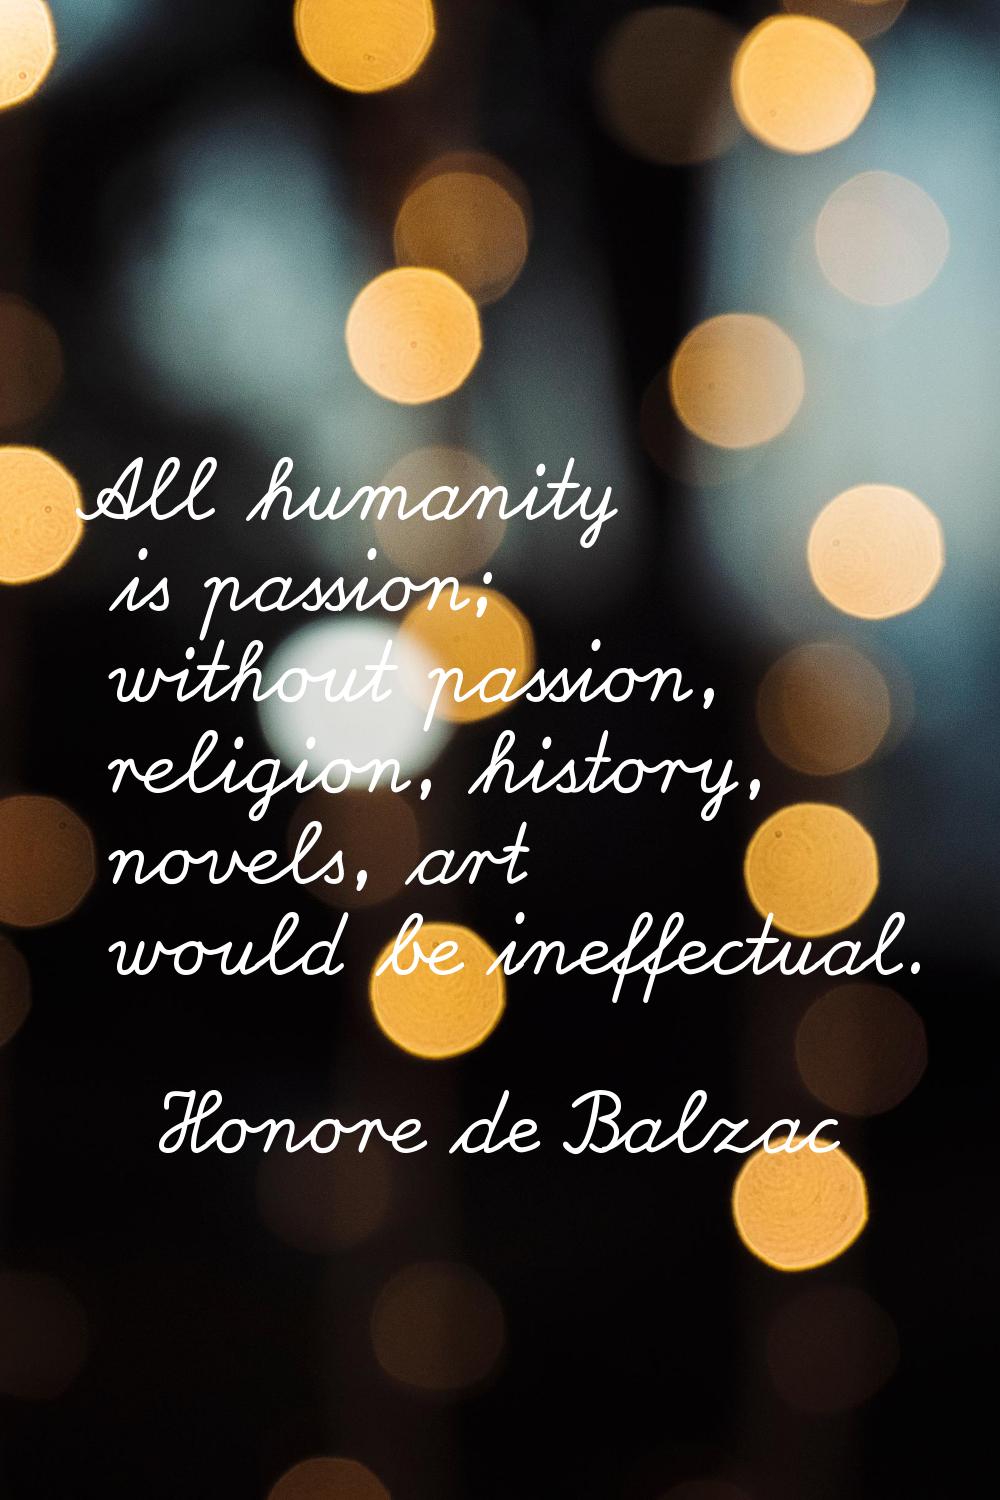 All humanity is passion; without passion, religion, history, novels, art would be ineffectual.